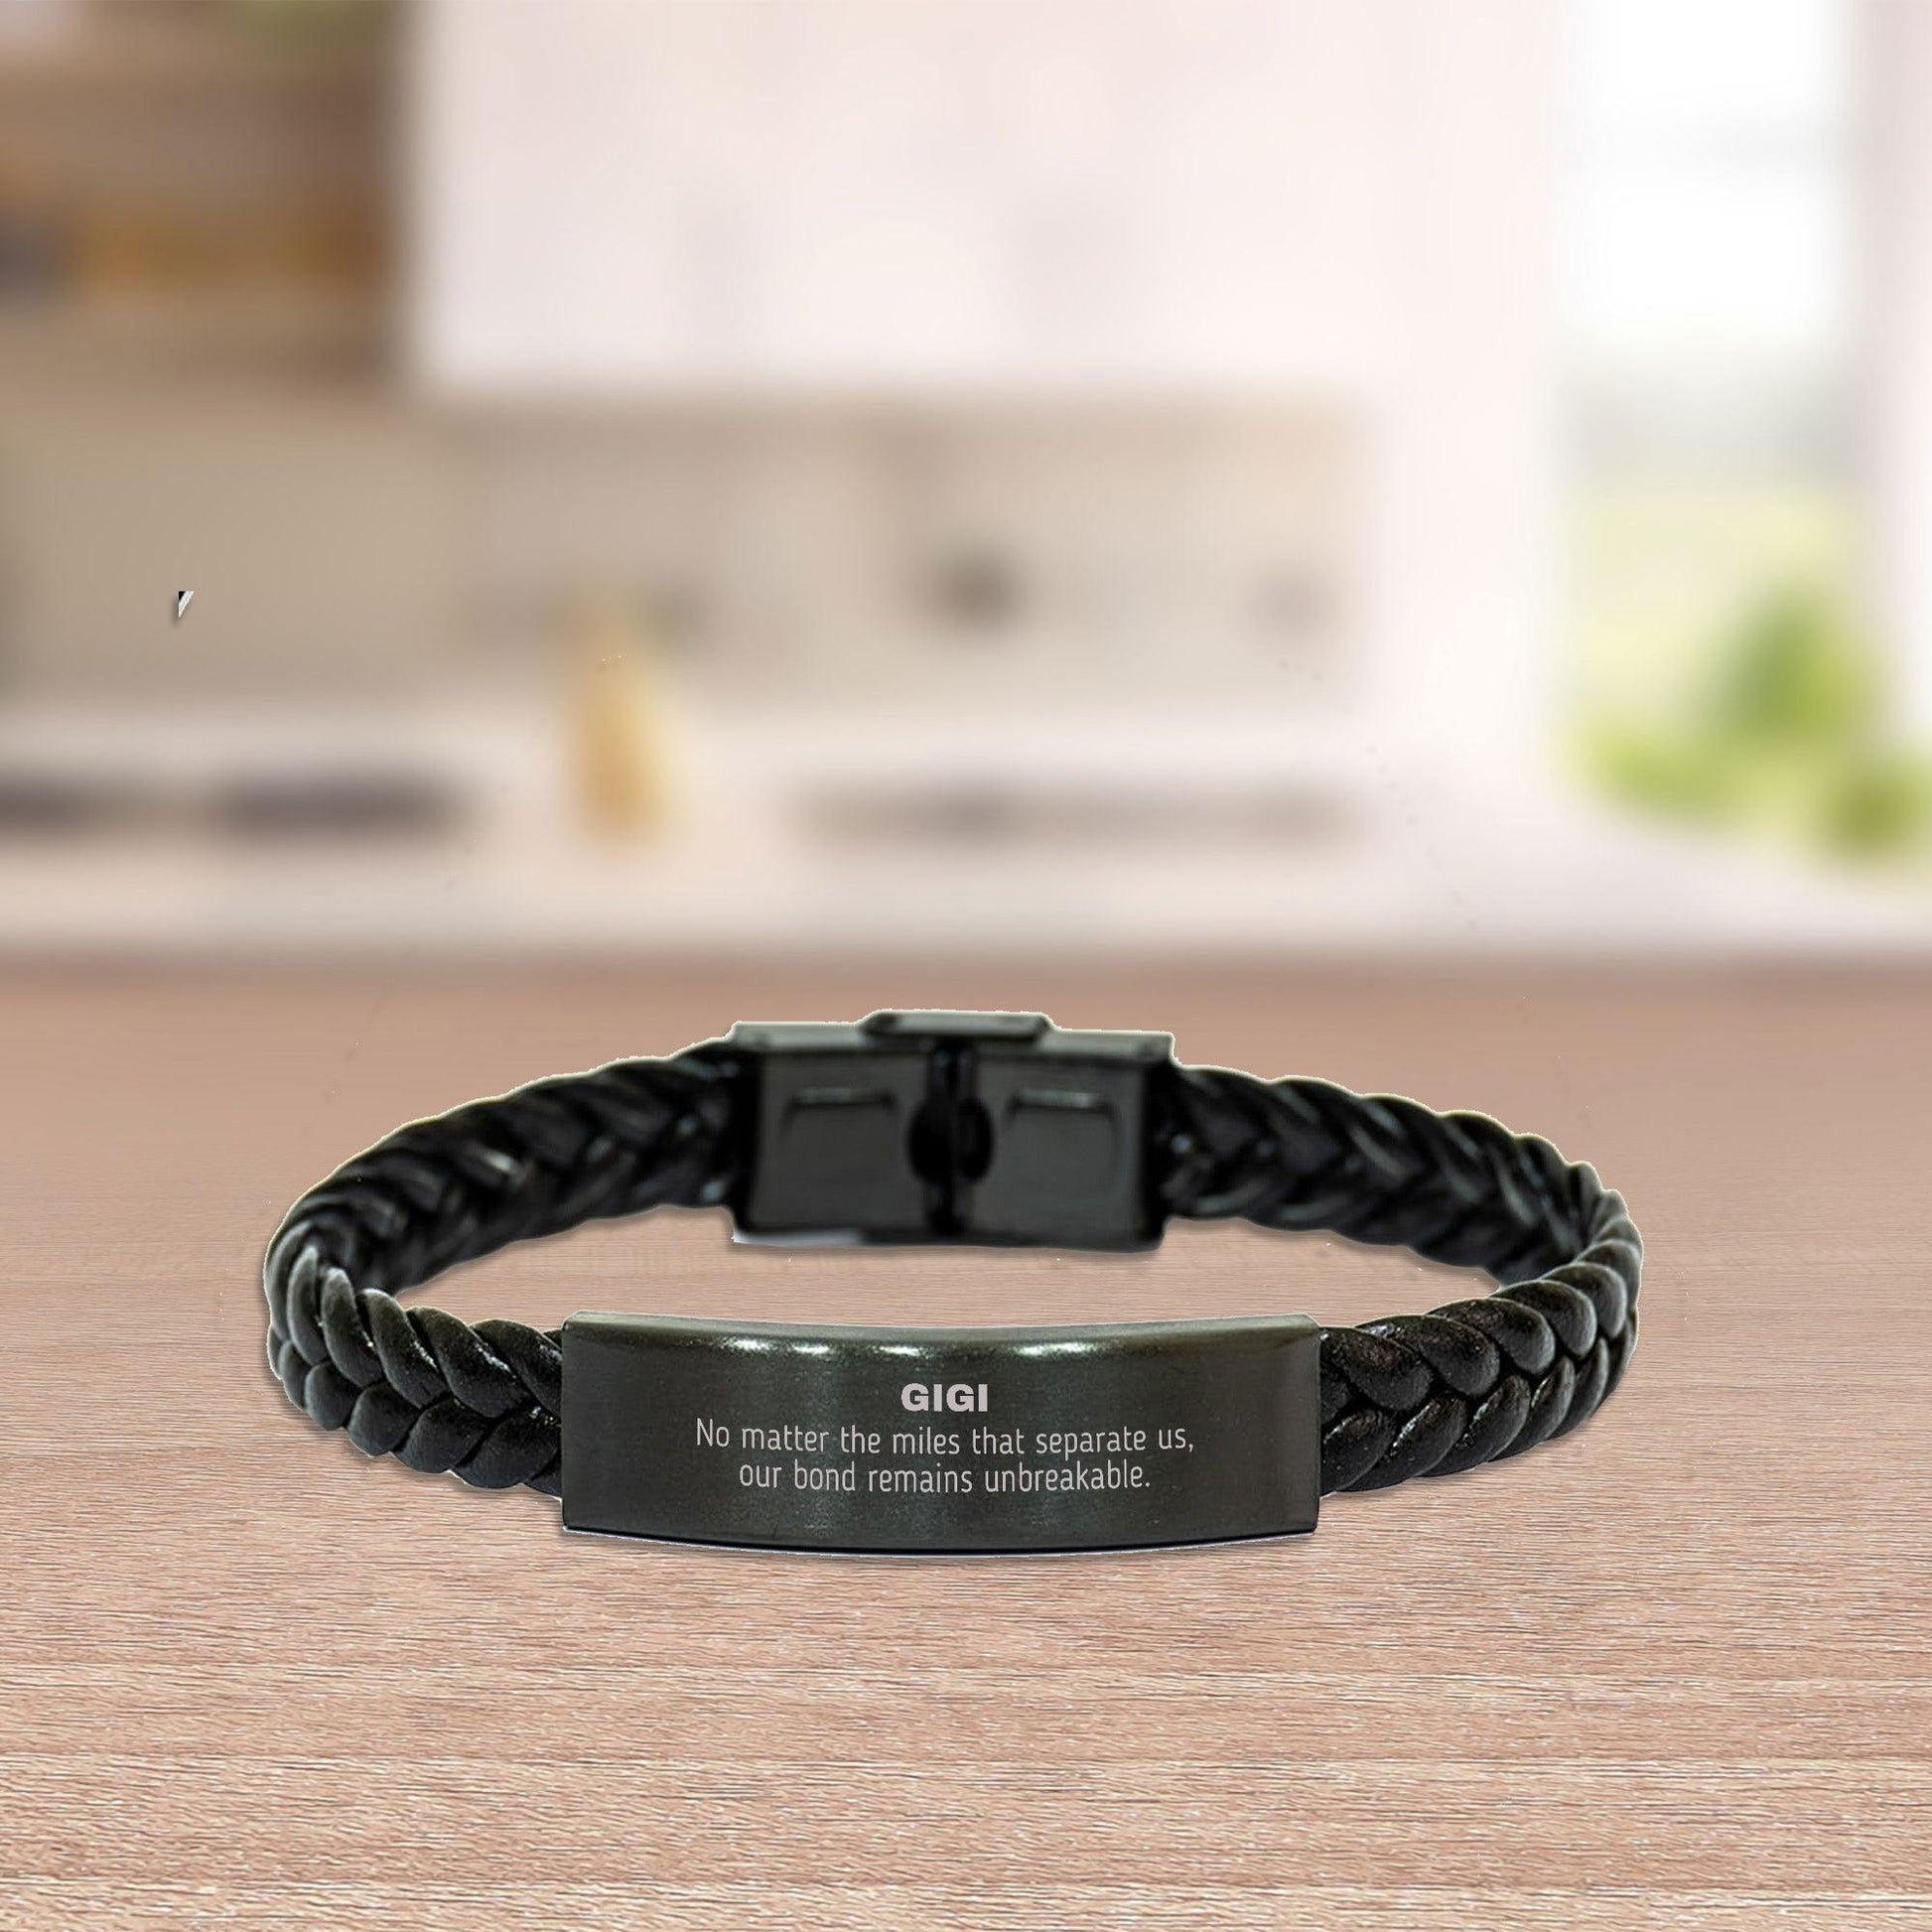 Gigi Long Distance Relationship No matter the miles that separate us, Our Bond Remains Unbreakable Braided Leather Bracelet Birthday Mother's Day Christmas Unique Gifts - Mallard Moon Gift Shop